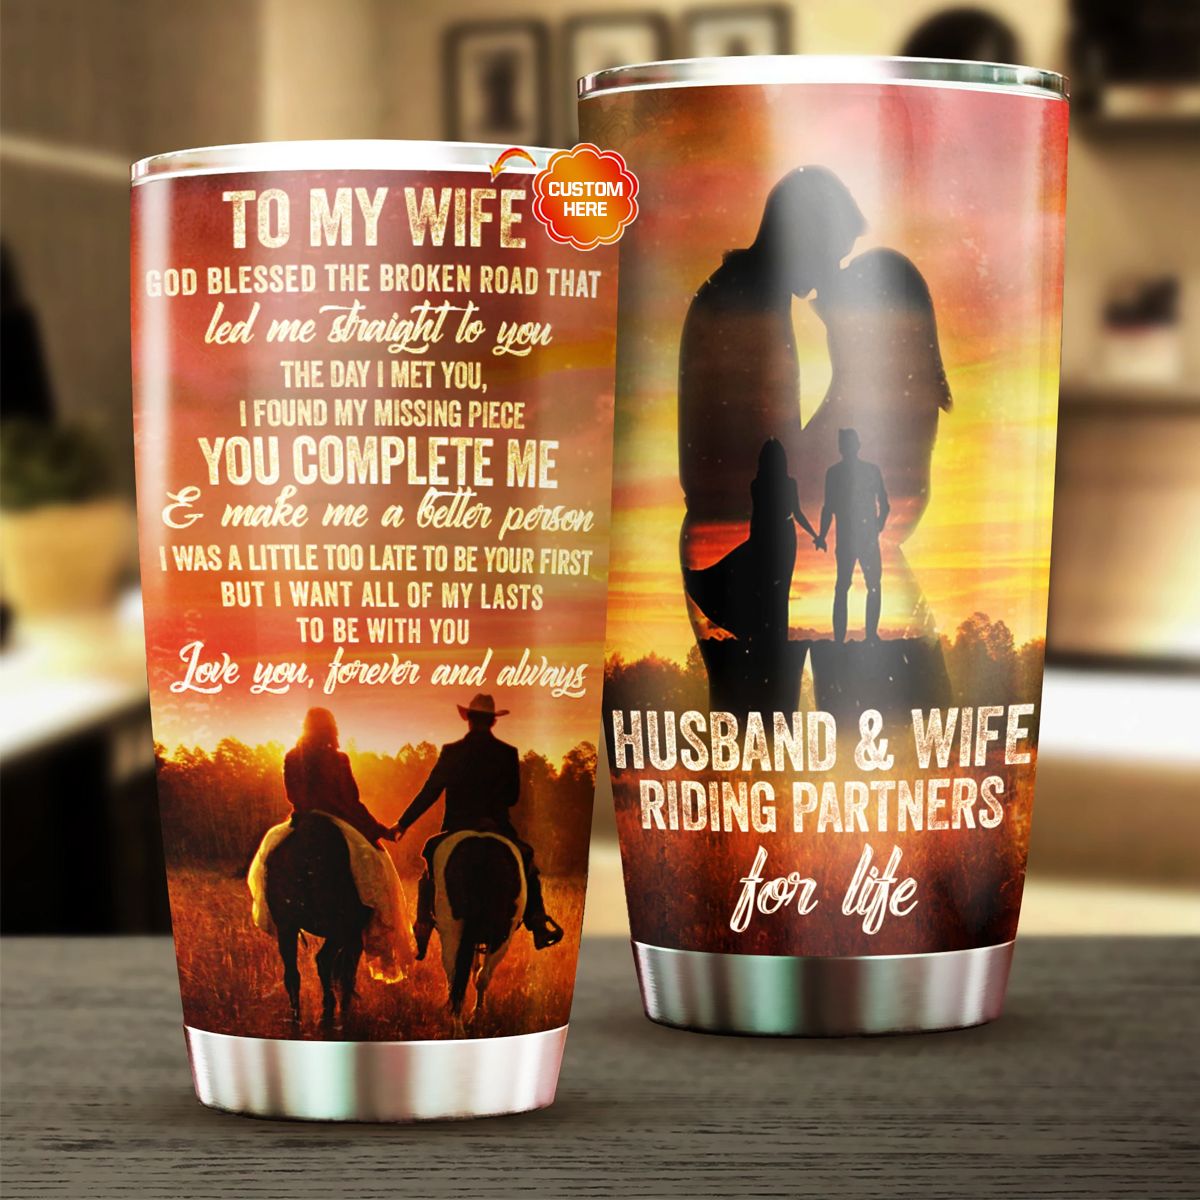 Personalized Gift To Couple Tumbler God Blessed The Broken Road That Led Me Straight To You